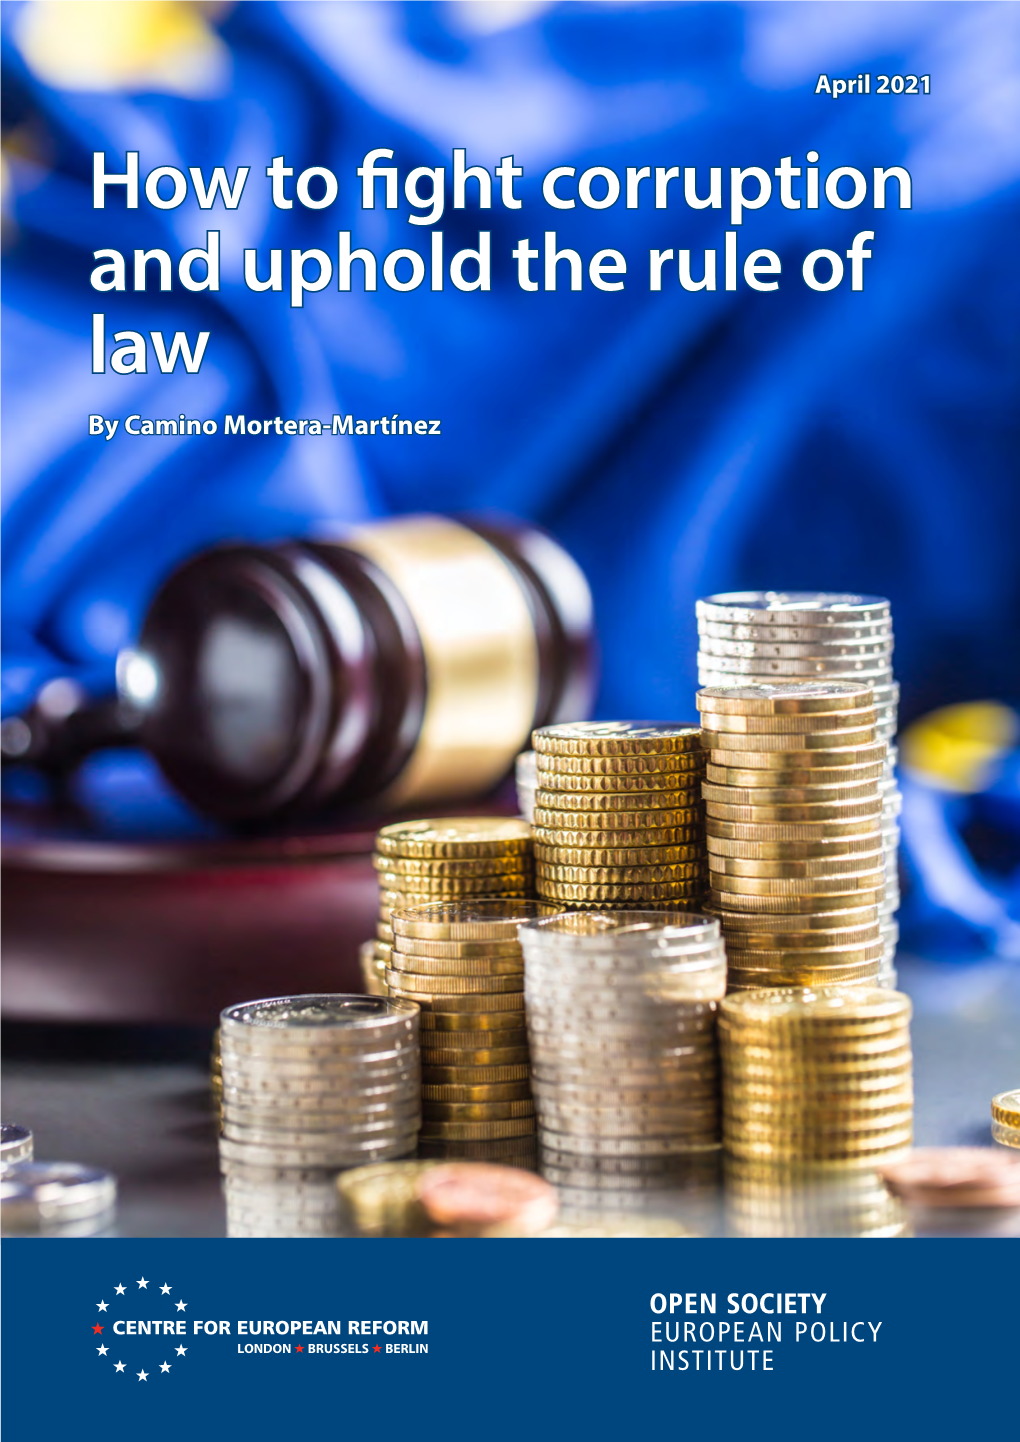 How to Fight Corruption and Uphold the Rule of Law by Camino Mortera-Martínez How to Fight Corruption and Uphold the Rule of Law